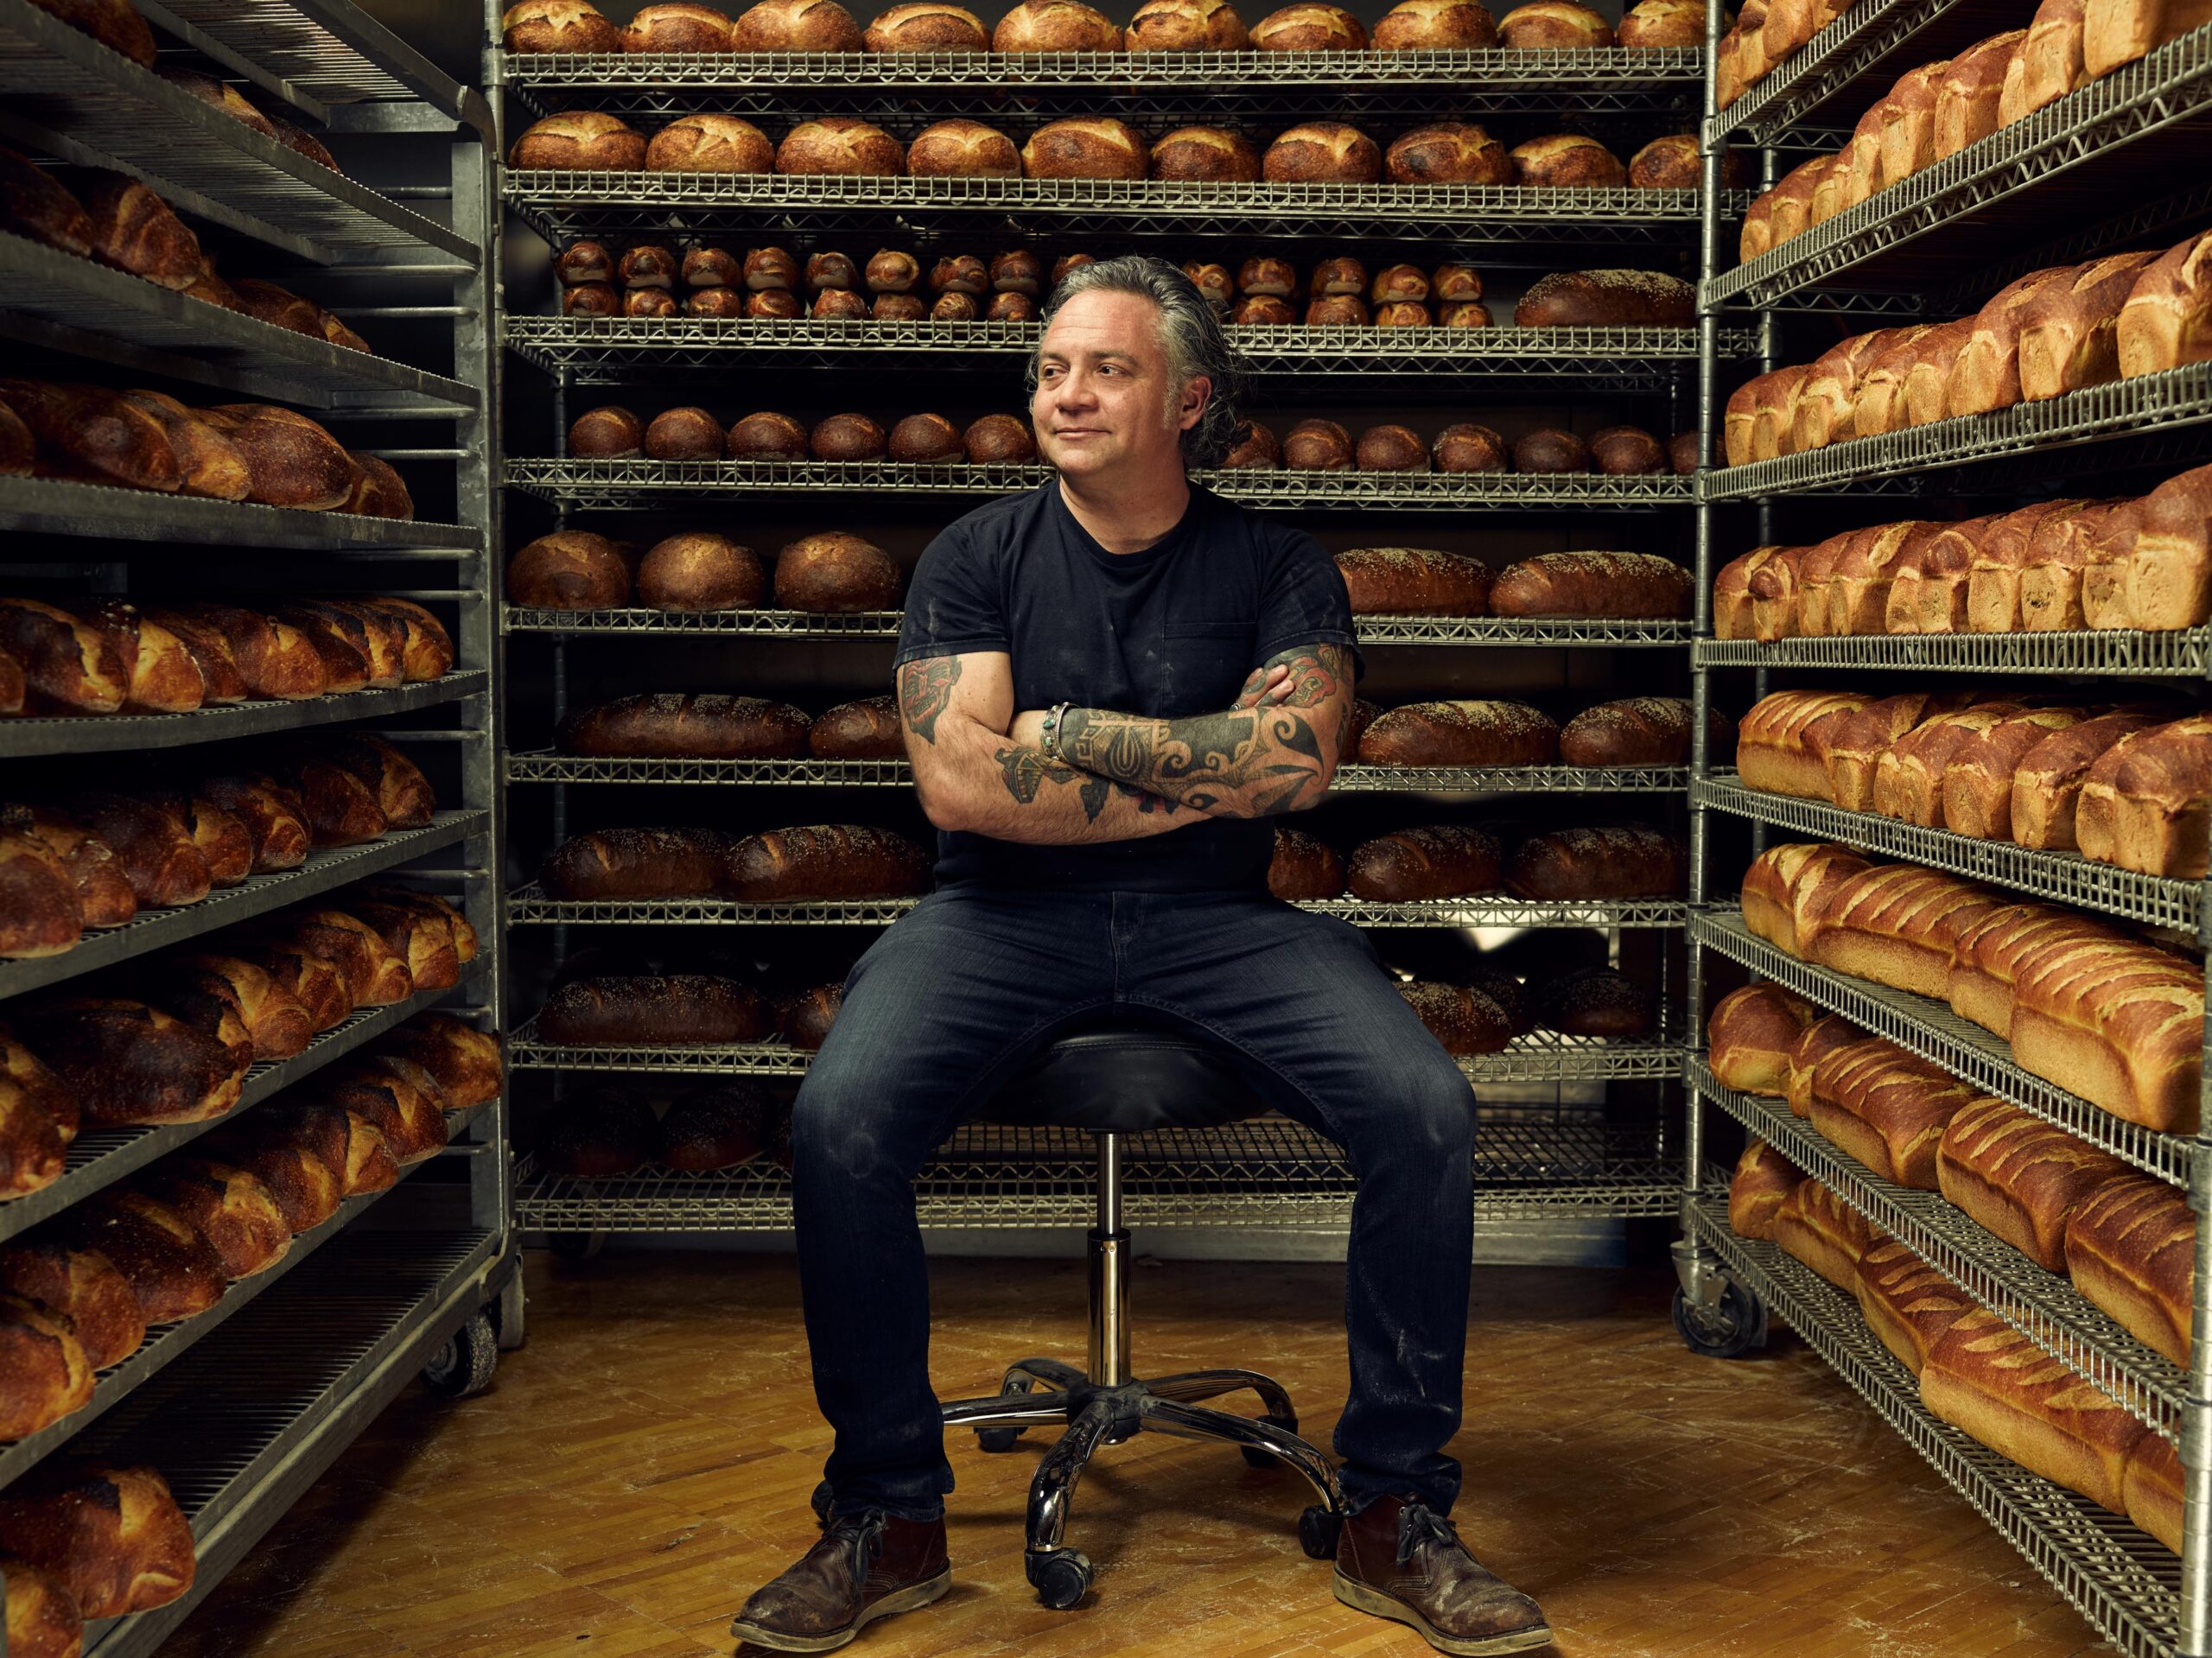 Ryan Morgan isn’t your typical baker. He also isn’t afraid to get his hands dirty — prior to going into the bread business he made living as a mechanic working on everything from his own motorcycle to medical machinery. What peaked Esquire’s Jeff Gordinier’s interest wasn’t just the bread that Ryan was making — which speaks for itself — but also the story of the man behind it all.